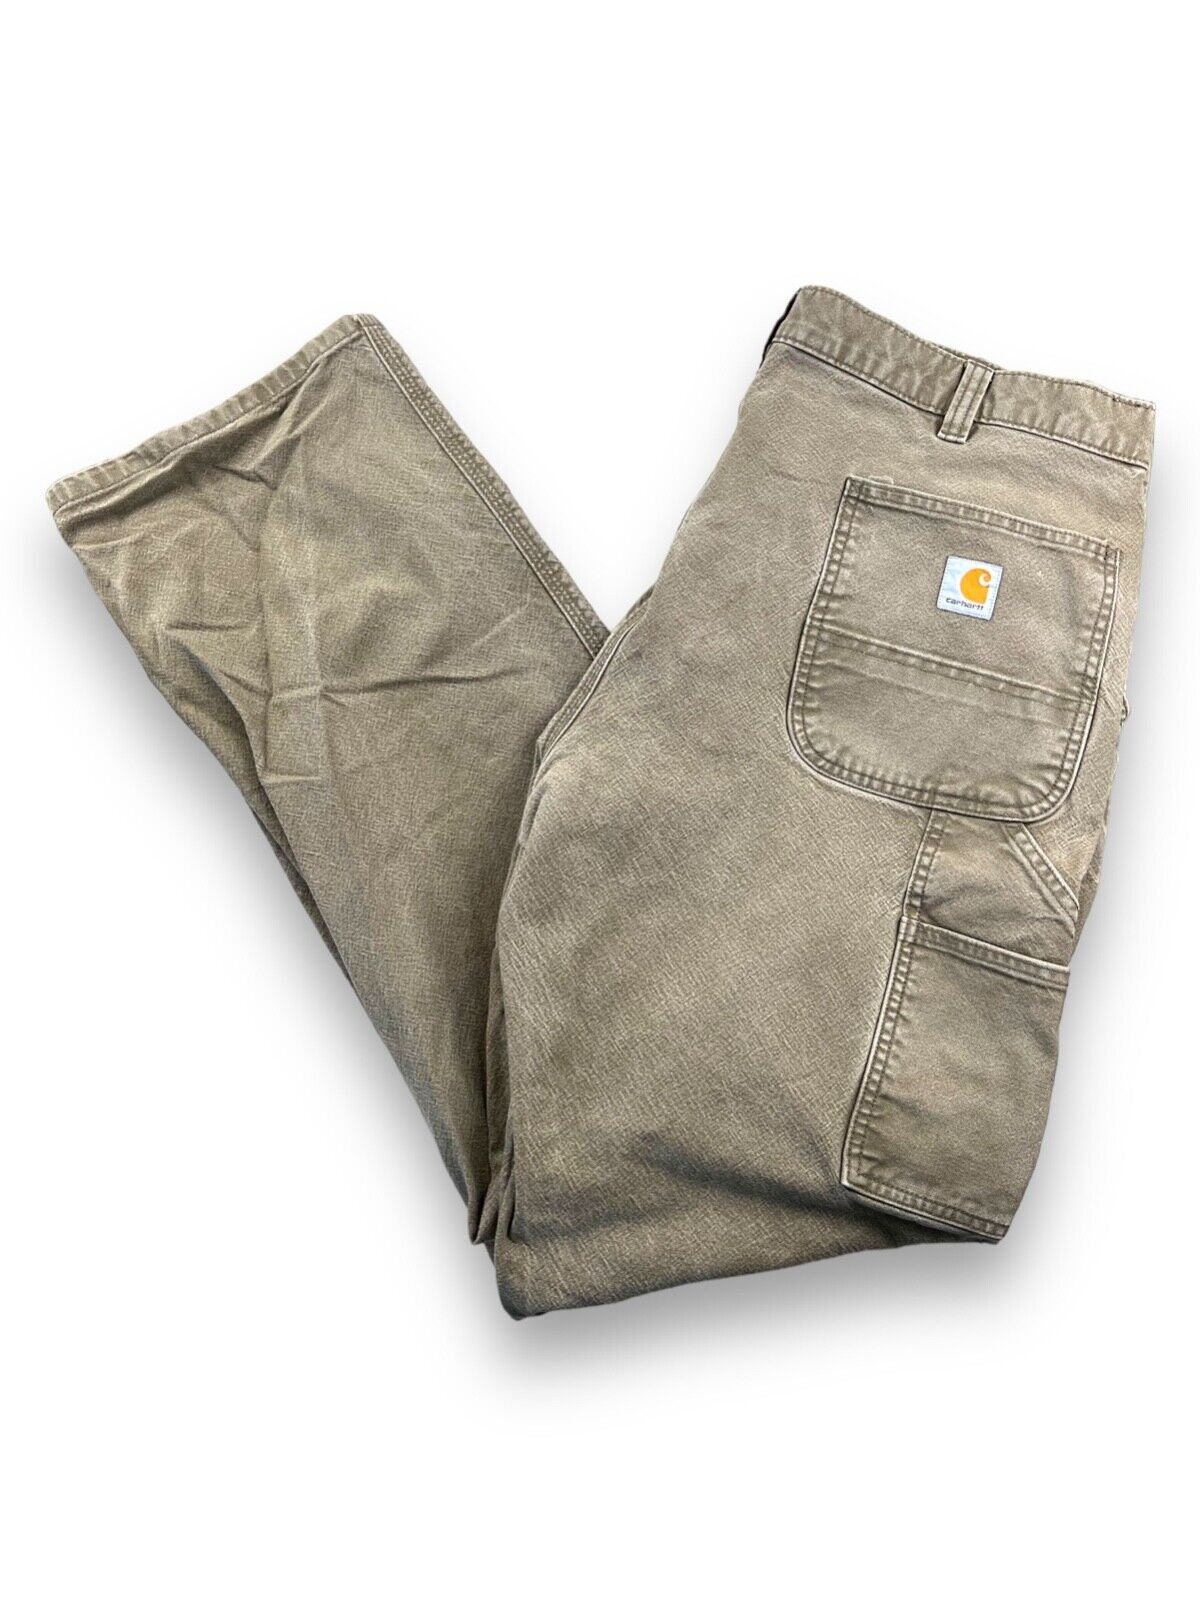 Carhartt Men's Loose Fit Washed Duck Utility Work Pants, 36 x 30, Moss, B11